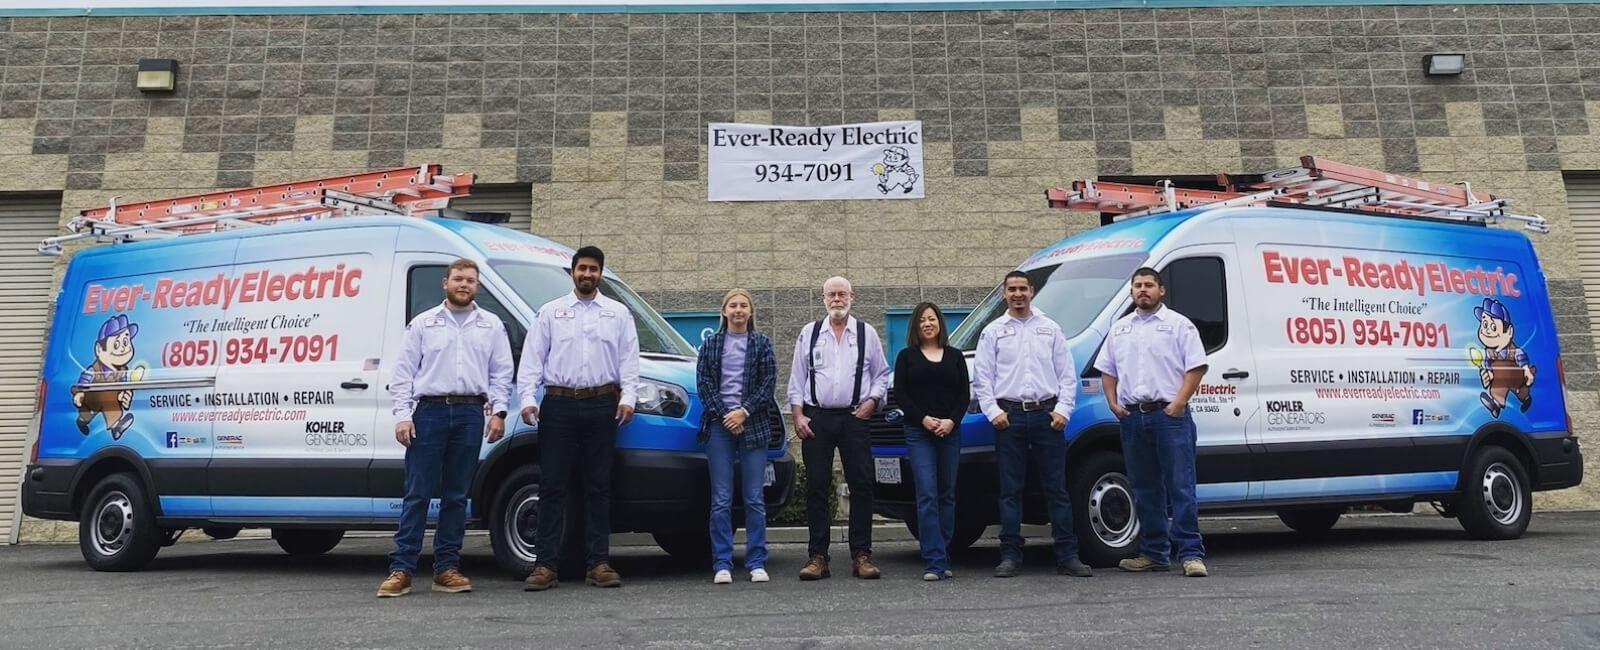 Ever-Ready Electric Team